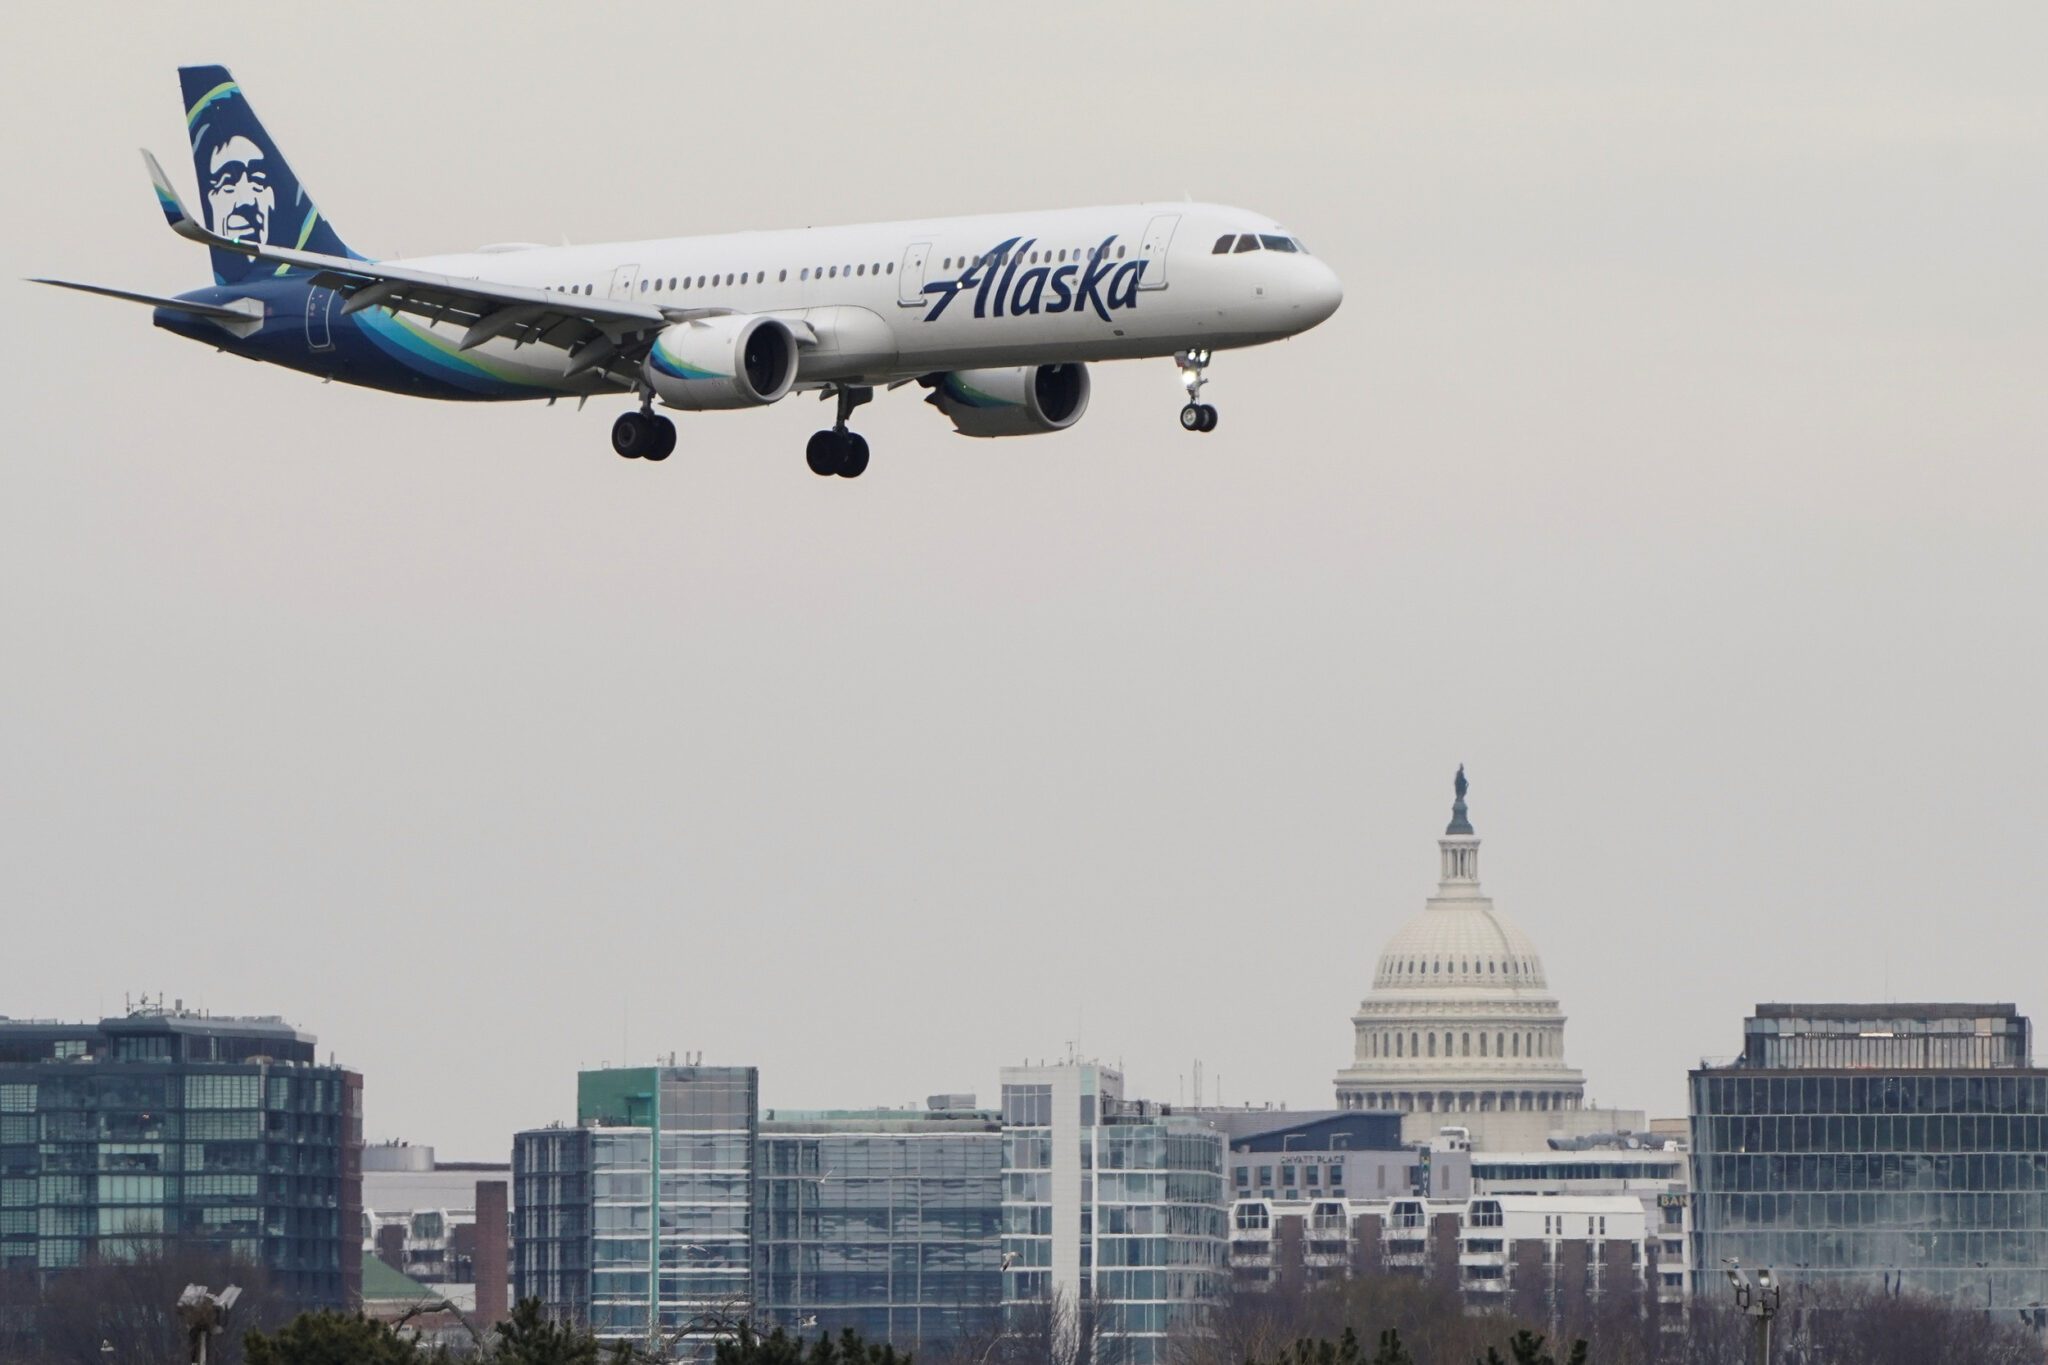 An Alaska Airlines pilot was charged with trying to disable the engines of a jet in flight. He told police afterward he was suffering a nervous breakdown.